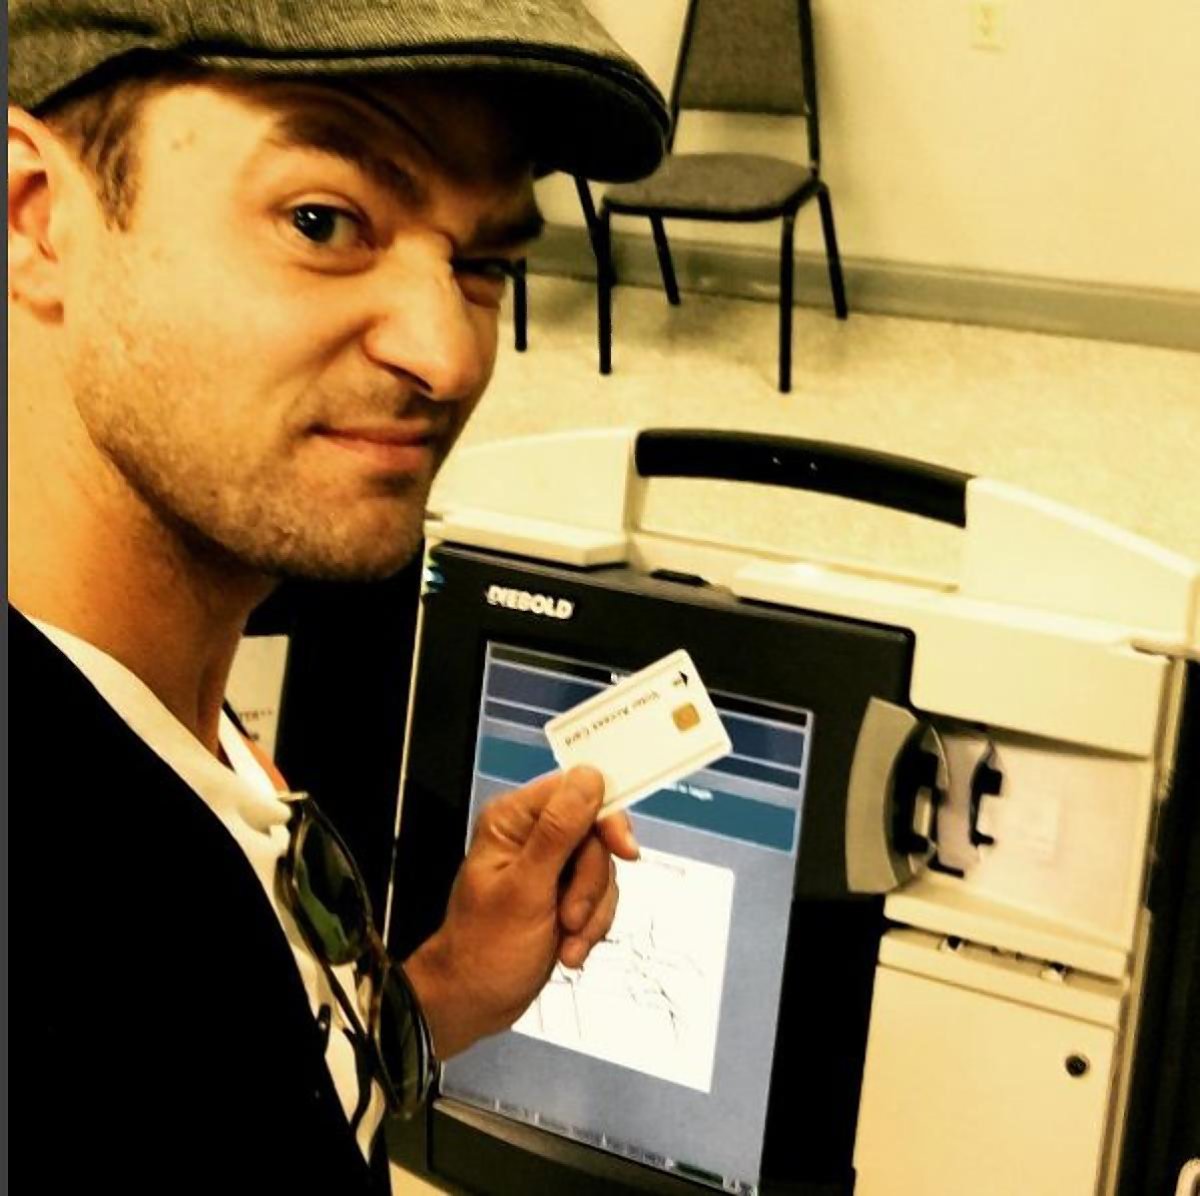 Bringing (ballot) selfies back: Justin Timberlake posted this photo of himself voting in Tennessee for the recent presidential election. The singer had flown from Los Angeles to Tennessee to vote early and posted the photo to encourage others to try early voting, which decreases lines at the polls on Election Day. Like Tennessee, New York State currently does not allow voter selfies. Unlike Tennessee, New York does not have early voting.